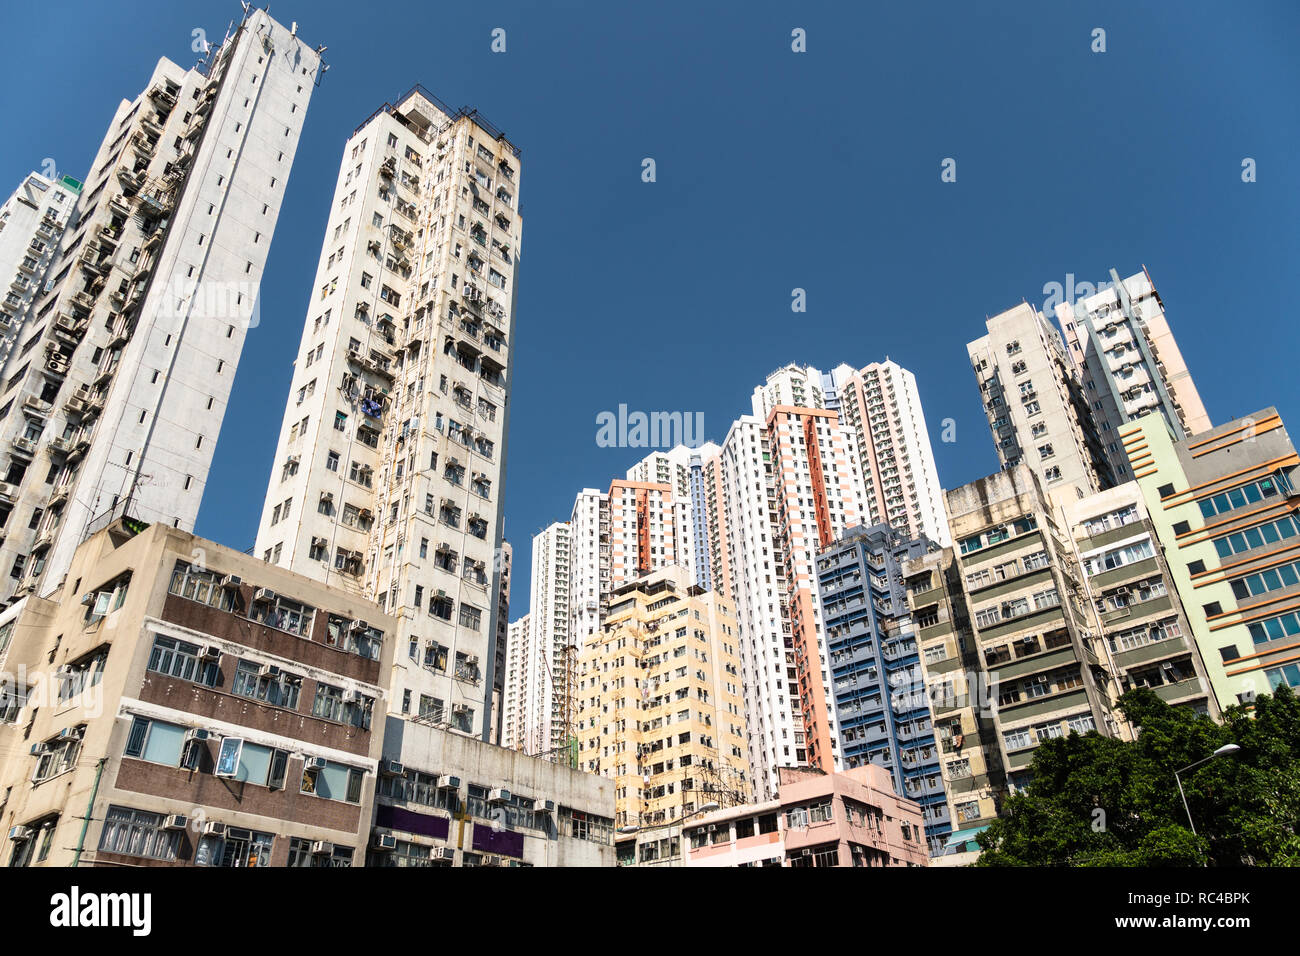 Apartment towers in the very densly populated city of Aberdeen in Hong Kong island in Hong Kong SAR, China. Stock Photo